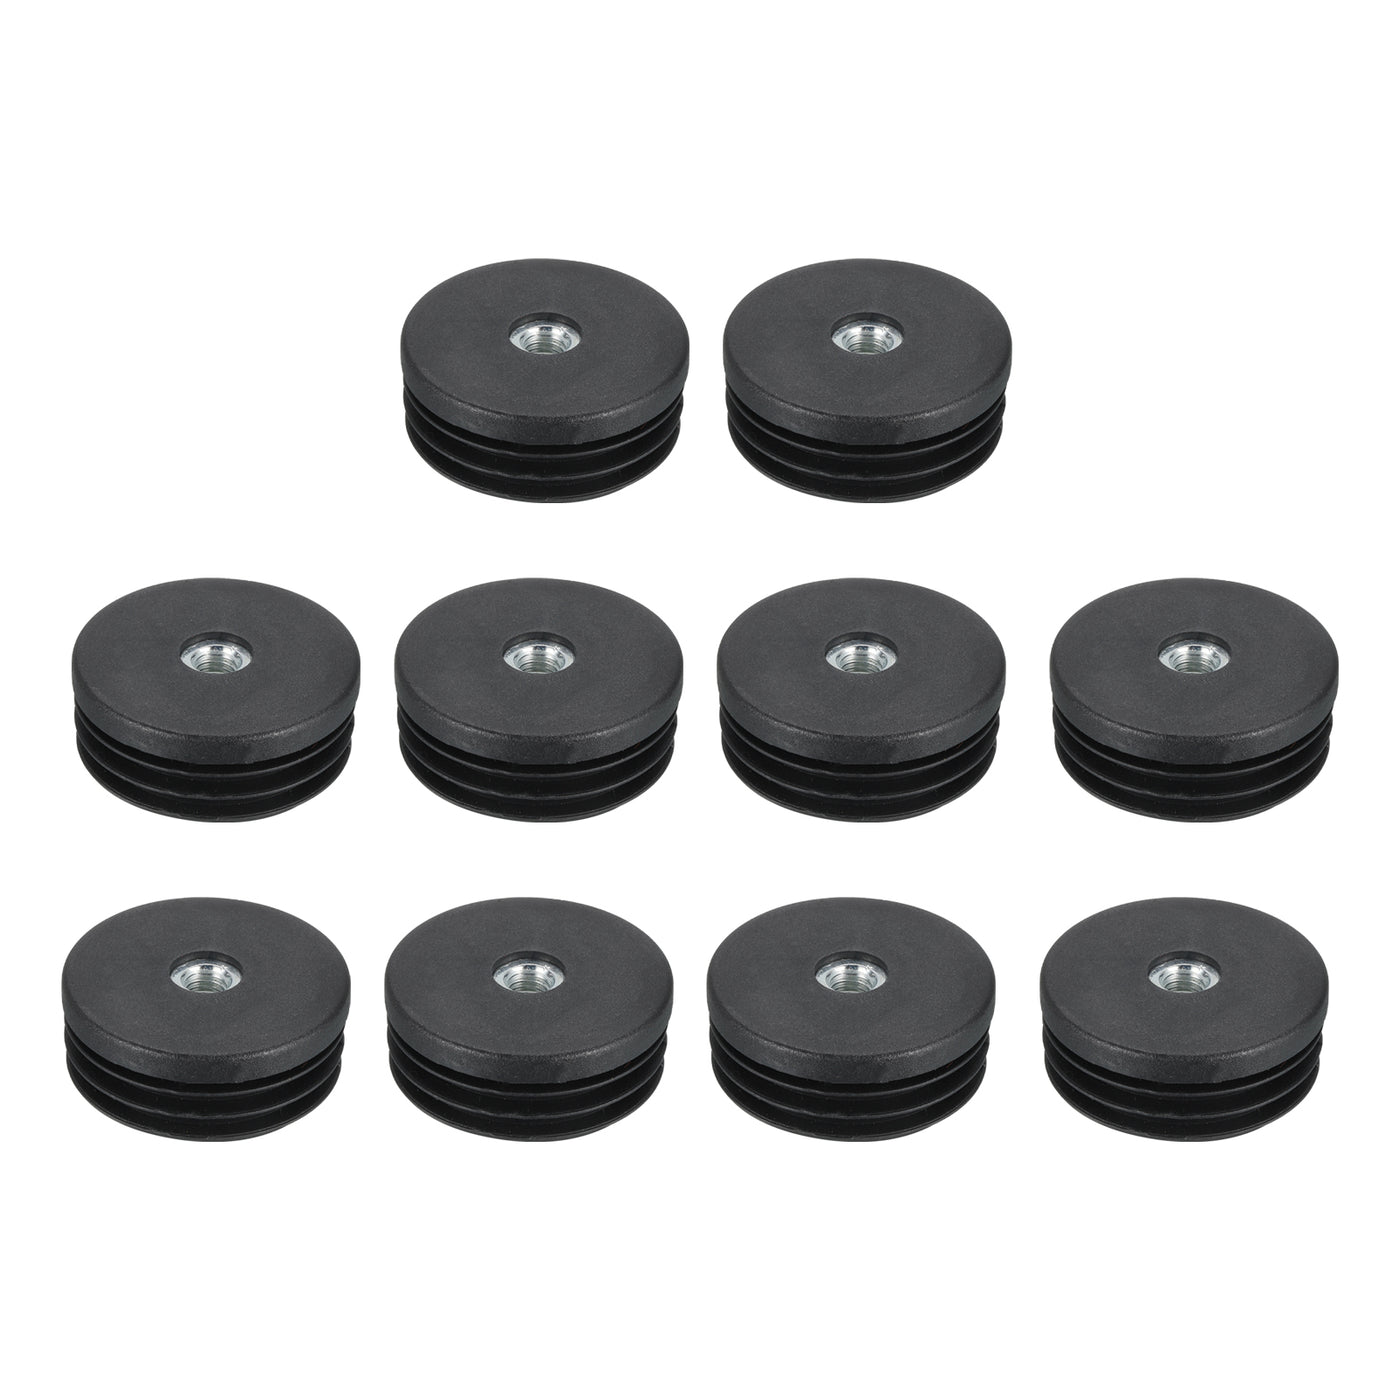 uxcell Uxcell 10Pcs Caster Insert with Thread, 50mm/1.97" M8 Thread for Furniture